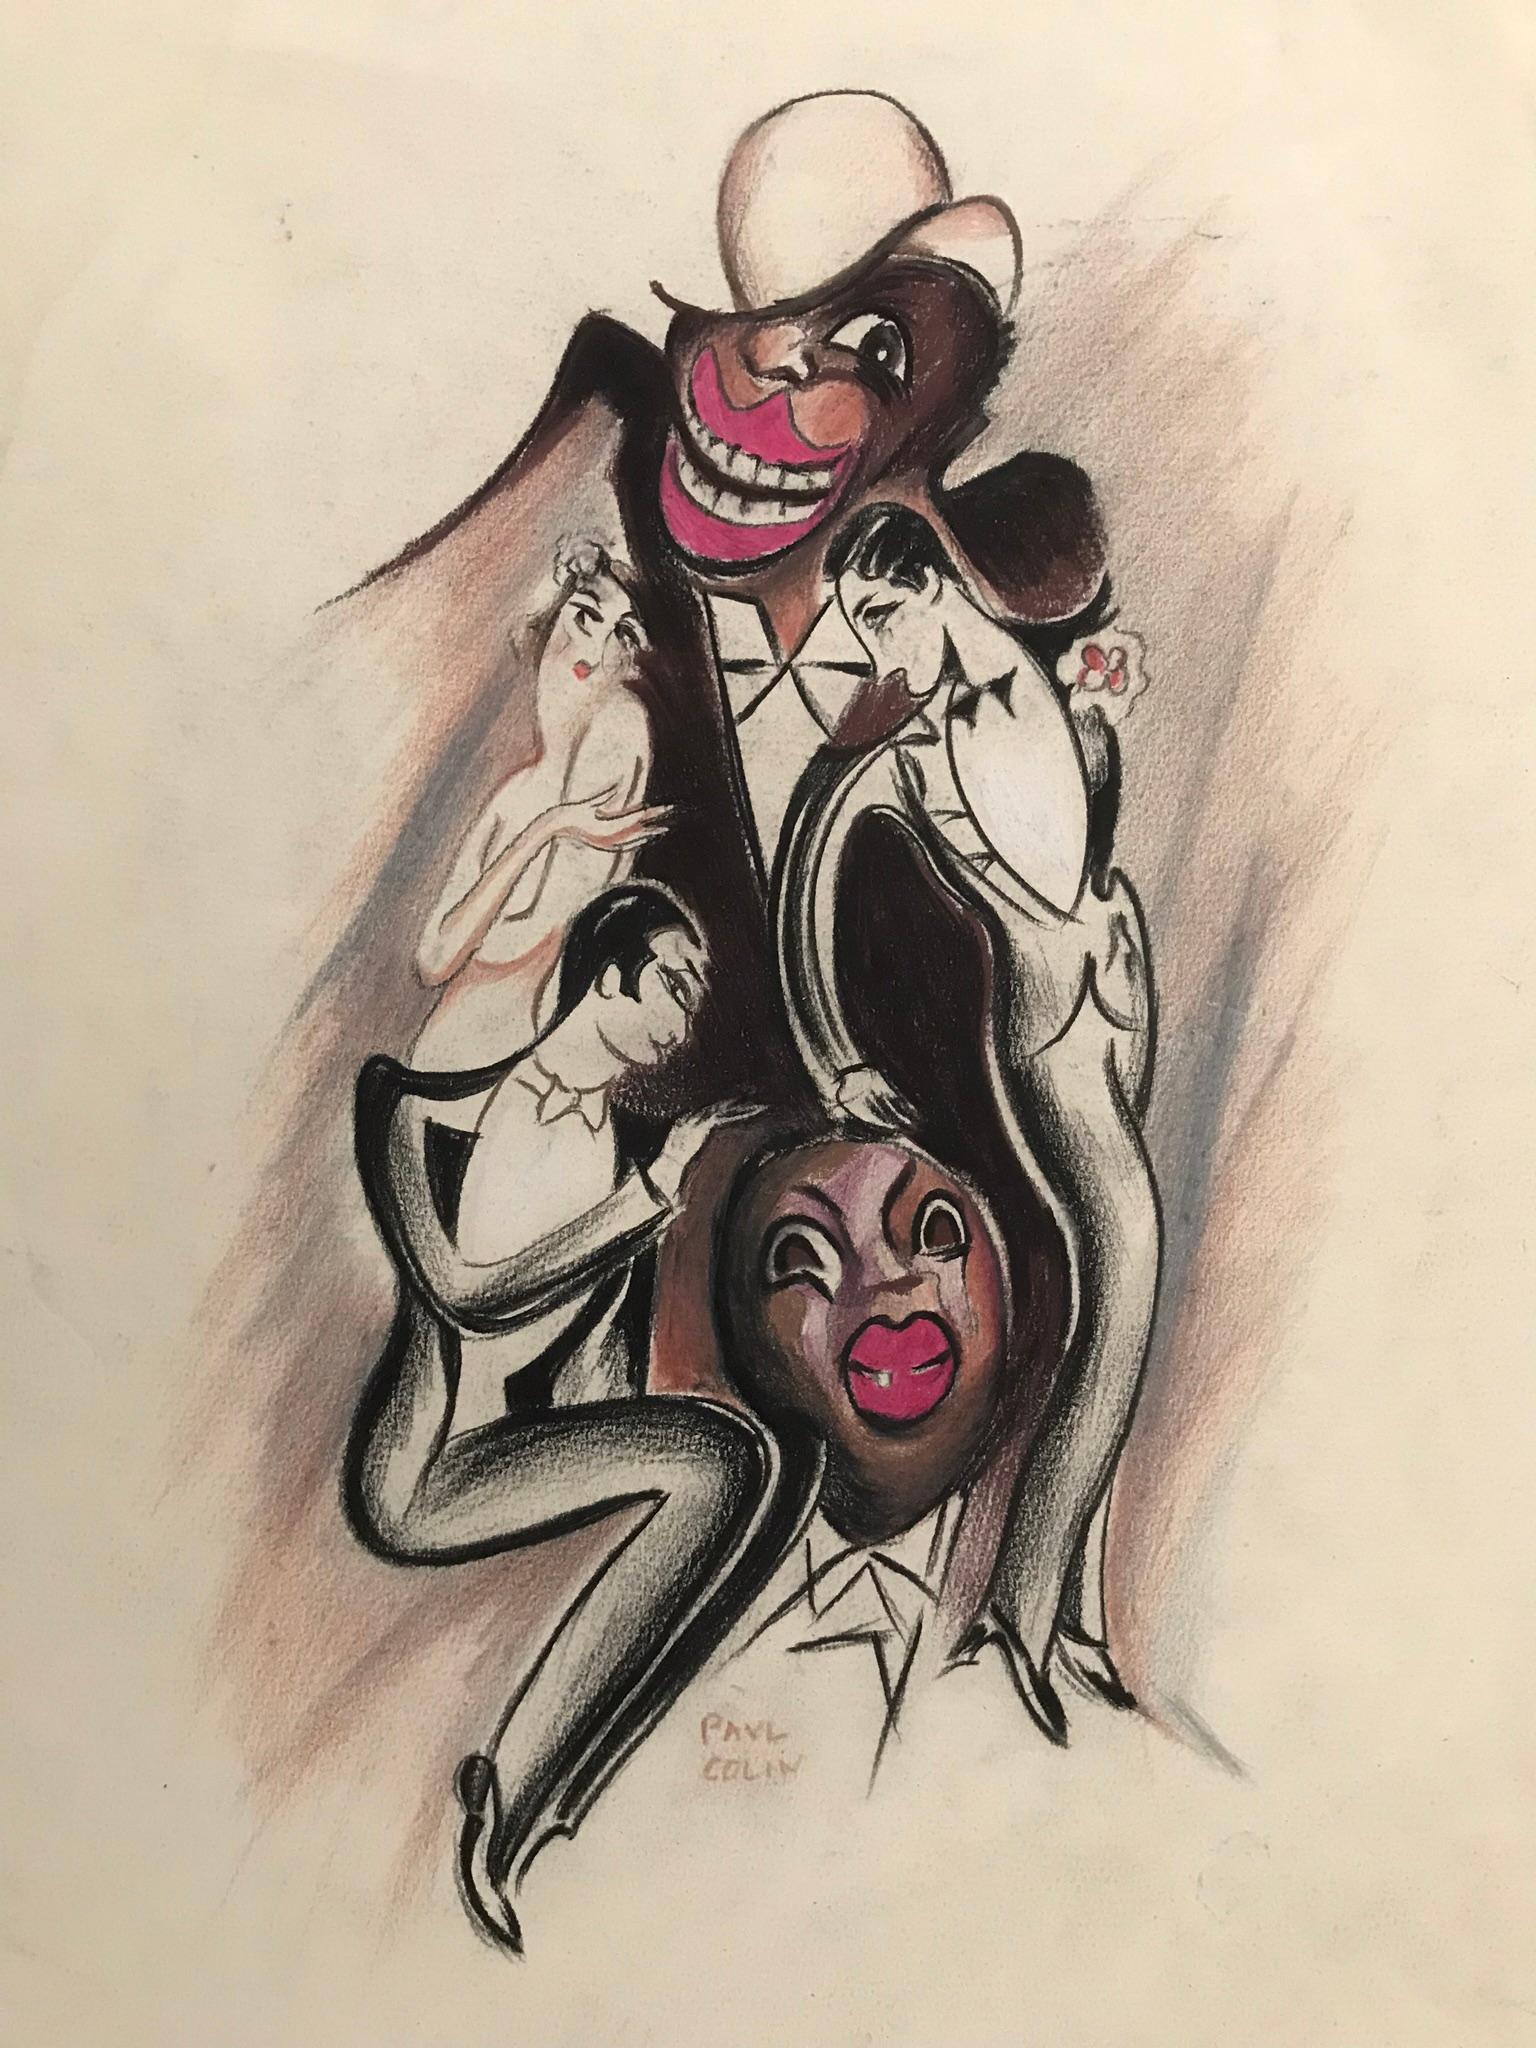 Paul Colin (1892-1985).

Original drawing with colored pencils and charcoal on paper depicting Josephine Baker and a piano player.

Drawing by Paul Colin from the 1980s in a beautiful wooden lacquered and gilt frame.

Paul Colin used to draw